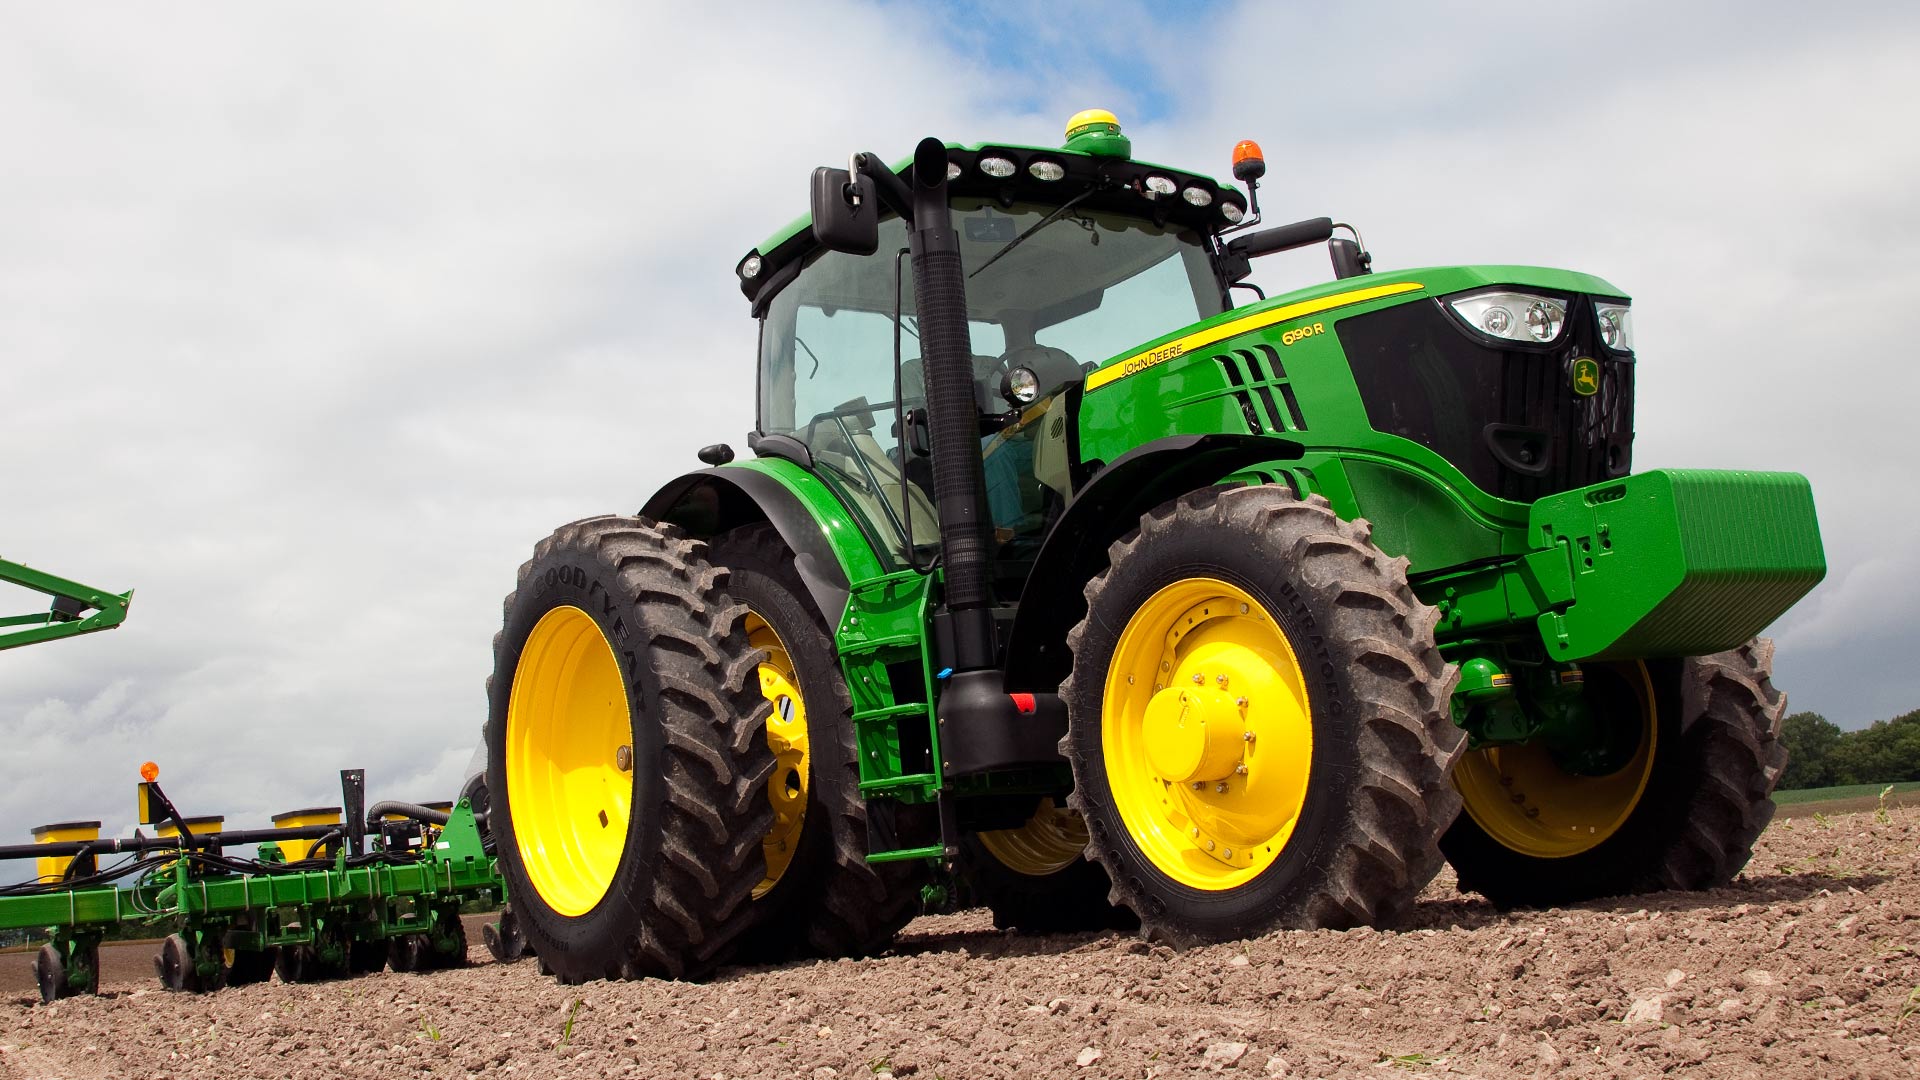 See the 6 Series row crop tractors